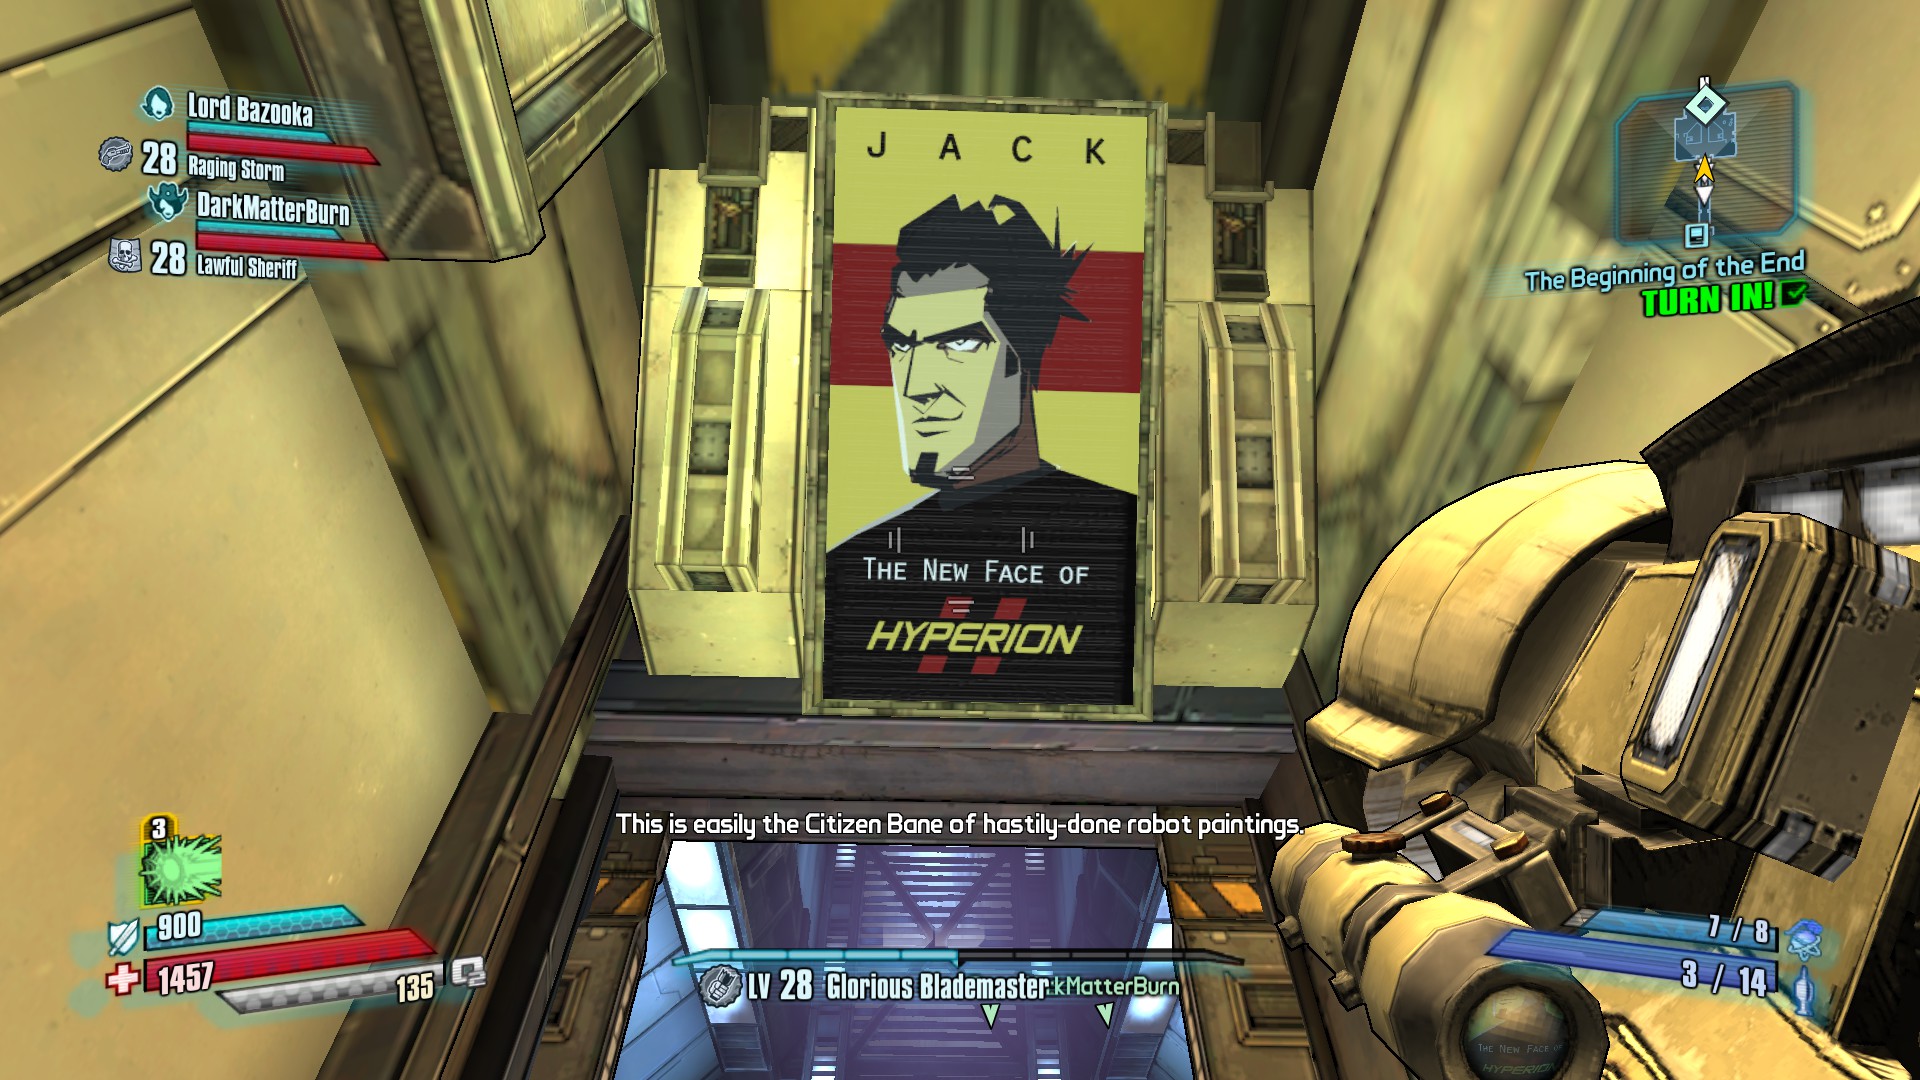 Geek insider, geekinsider, geekinsider. Com,, borderlands: the pre-sequel review, gaming